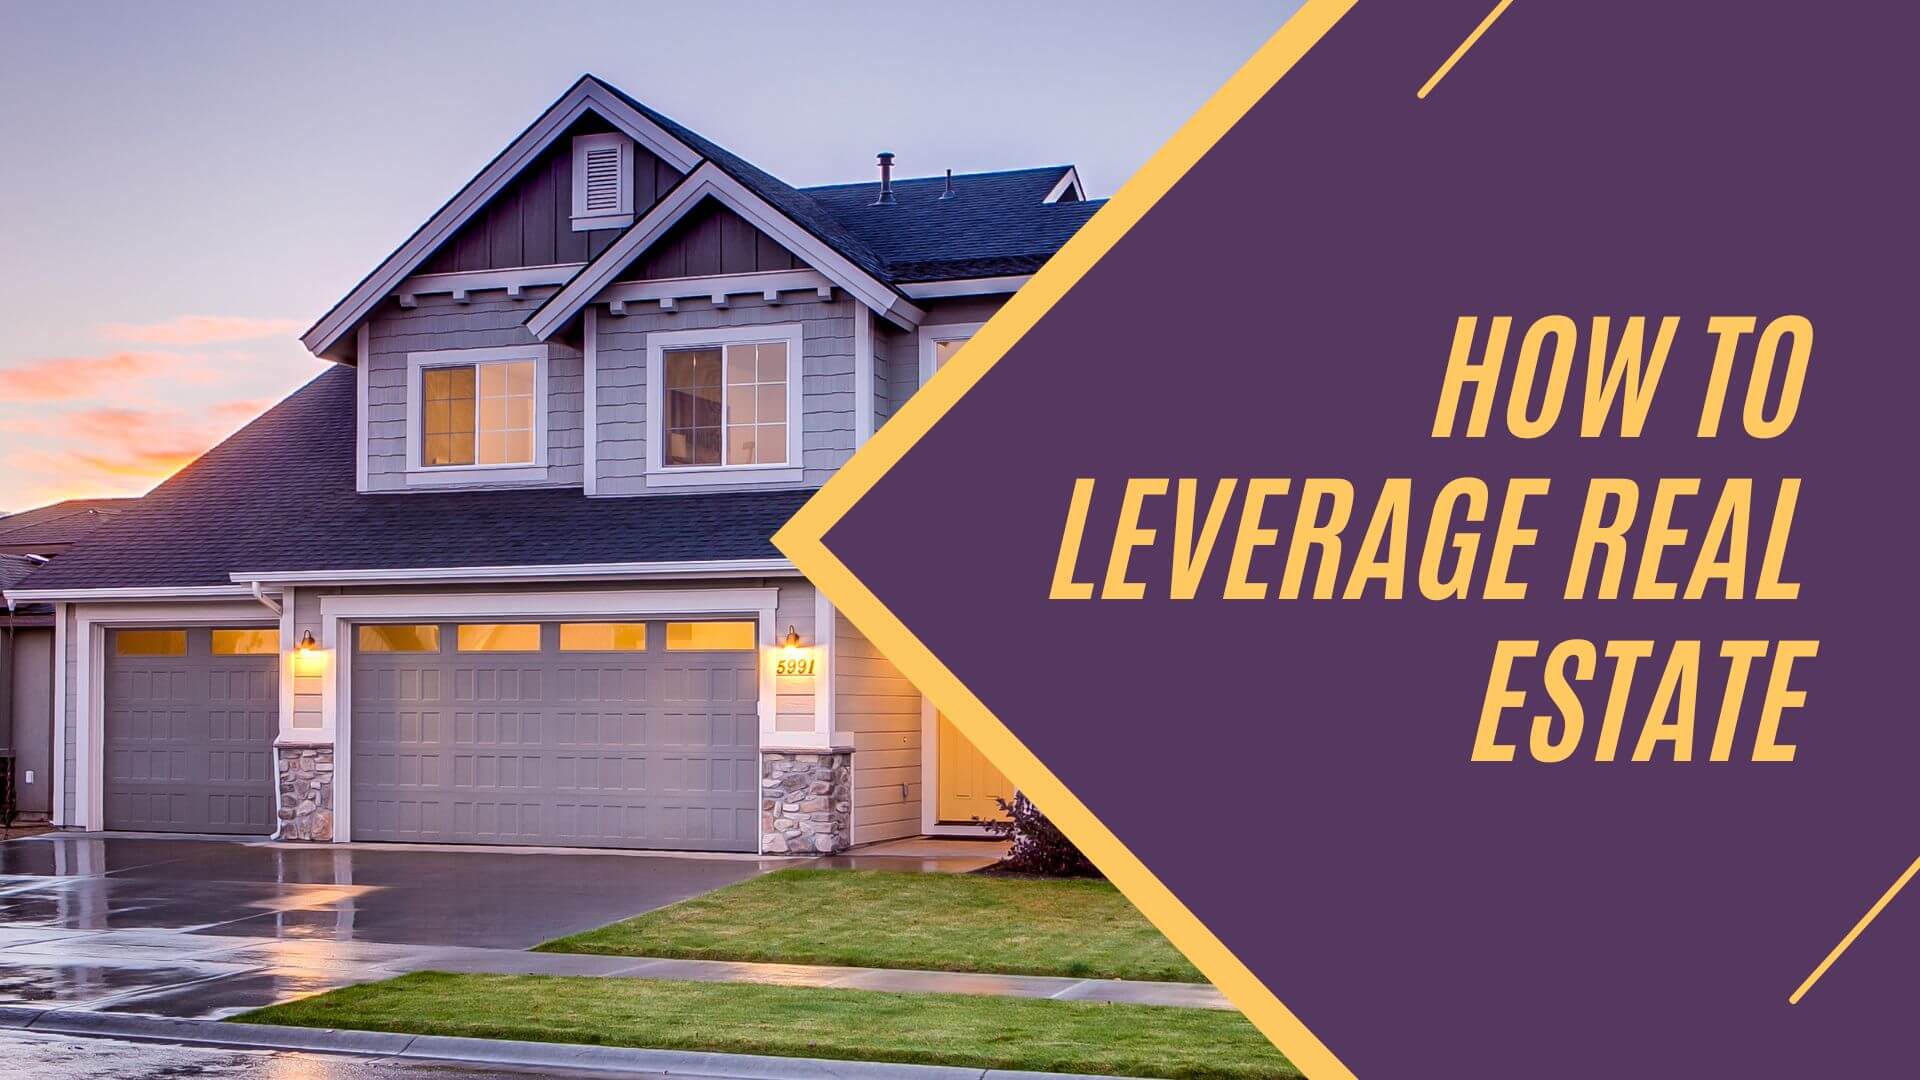 How to Leverage Real Estate